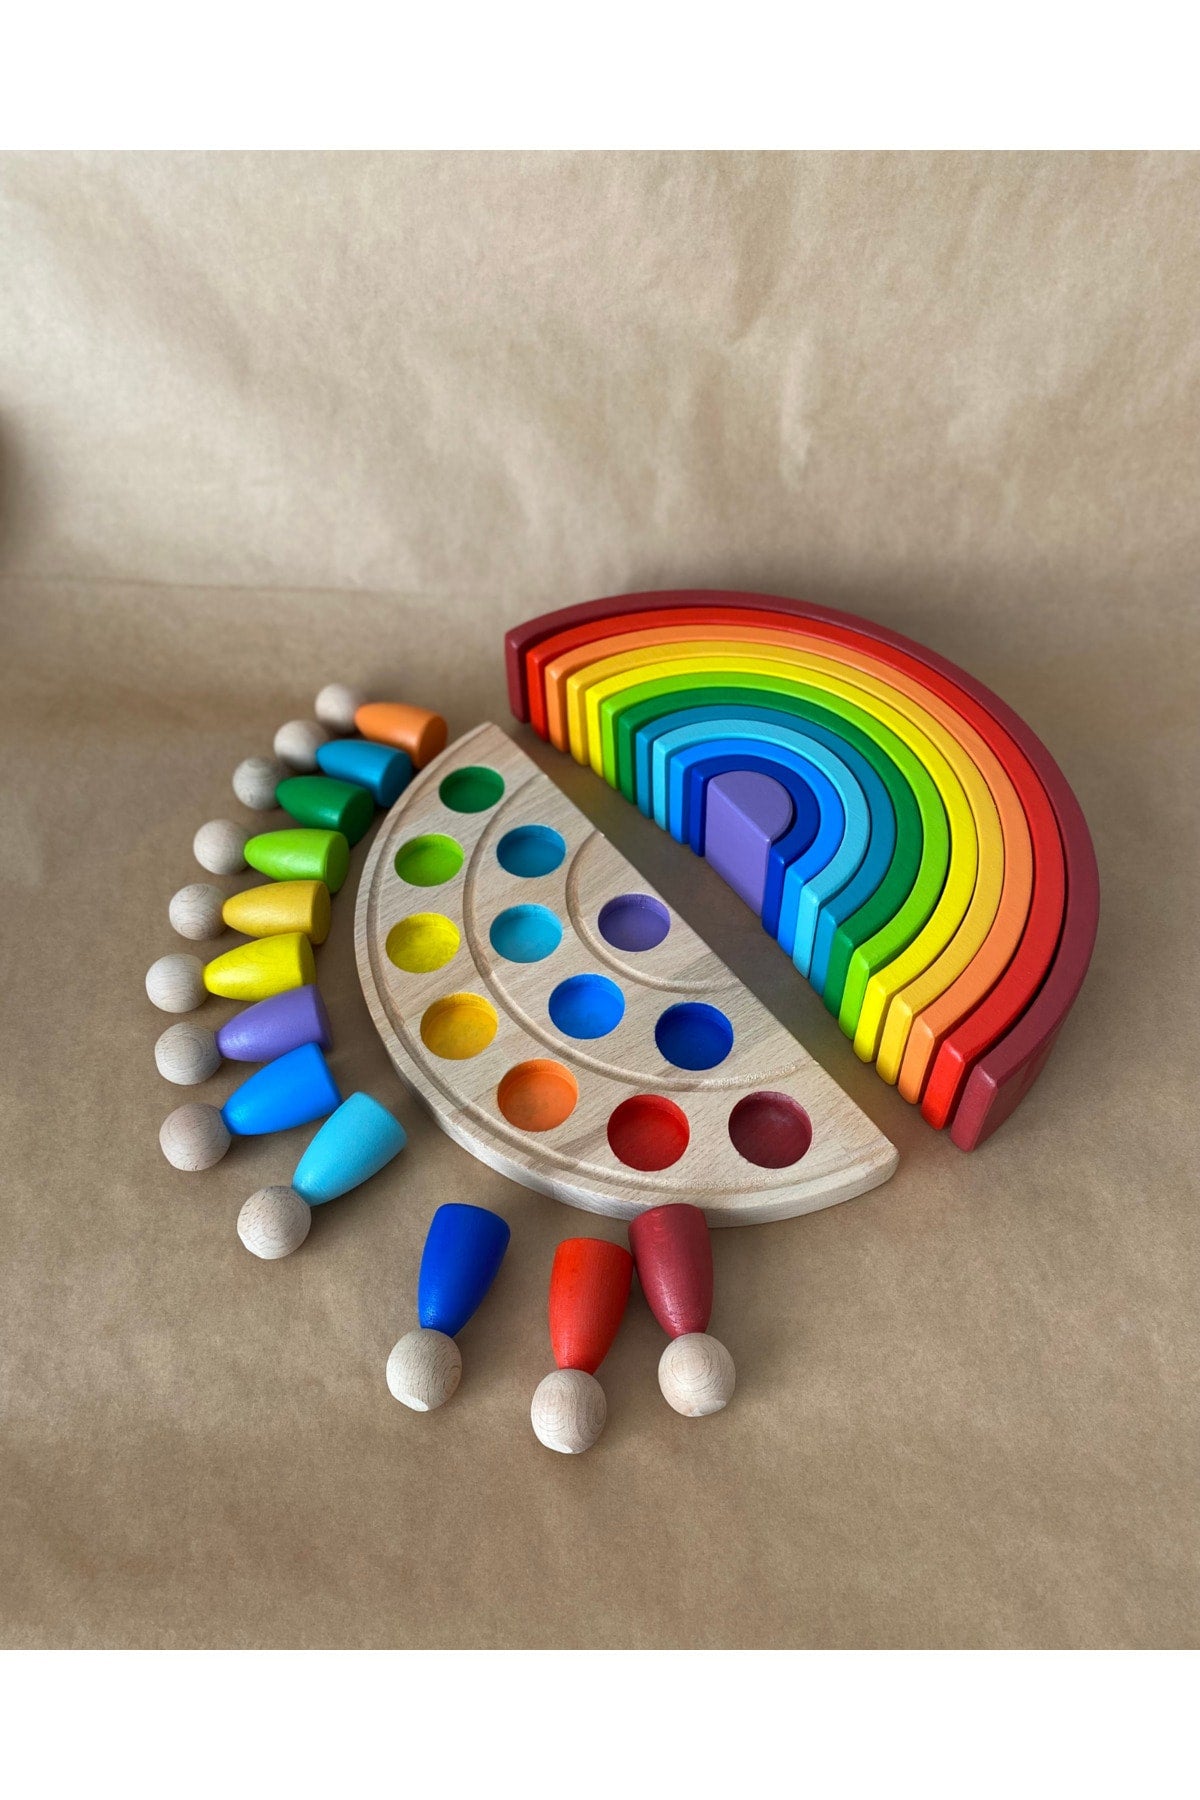 1 Year 12 Waldorf Rainbow Peg Baby Tray Set, Rainbow 12 Piece Color Matching Wooden Toy